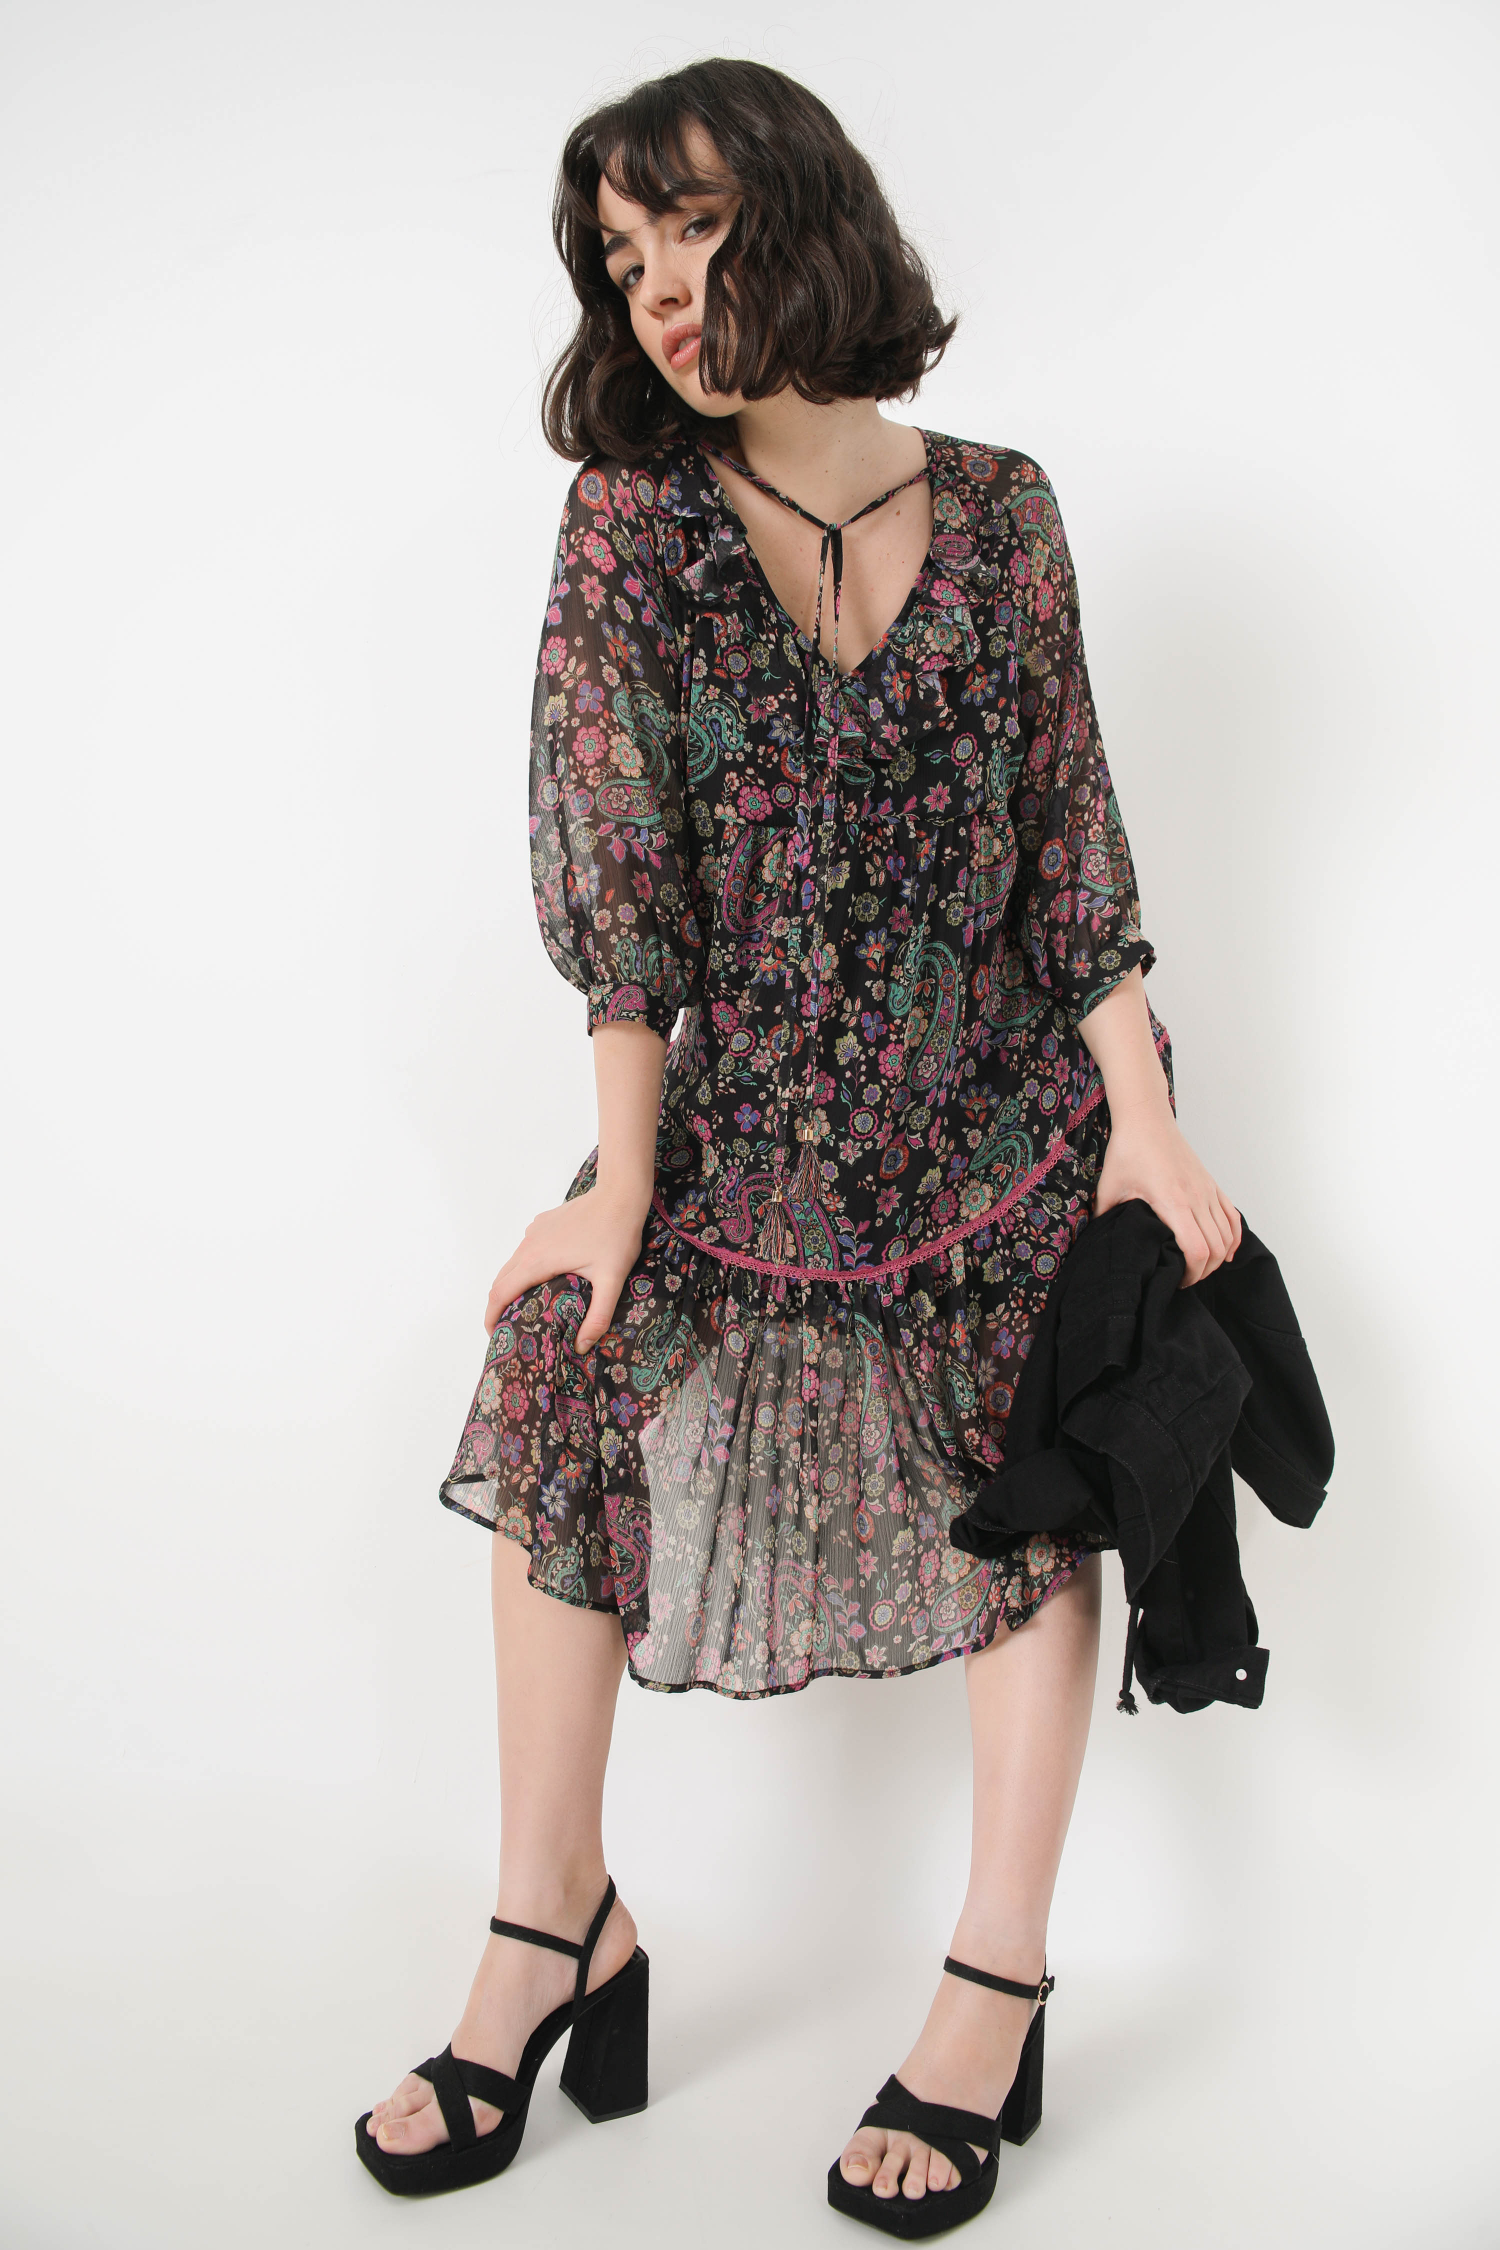 mid-length dress in floral print voile éco-responsable fabric